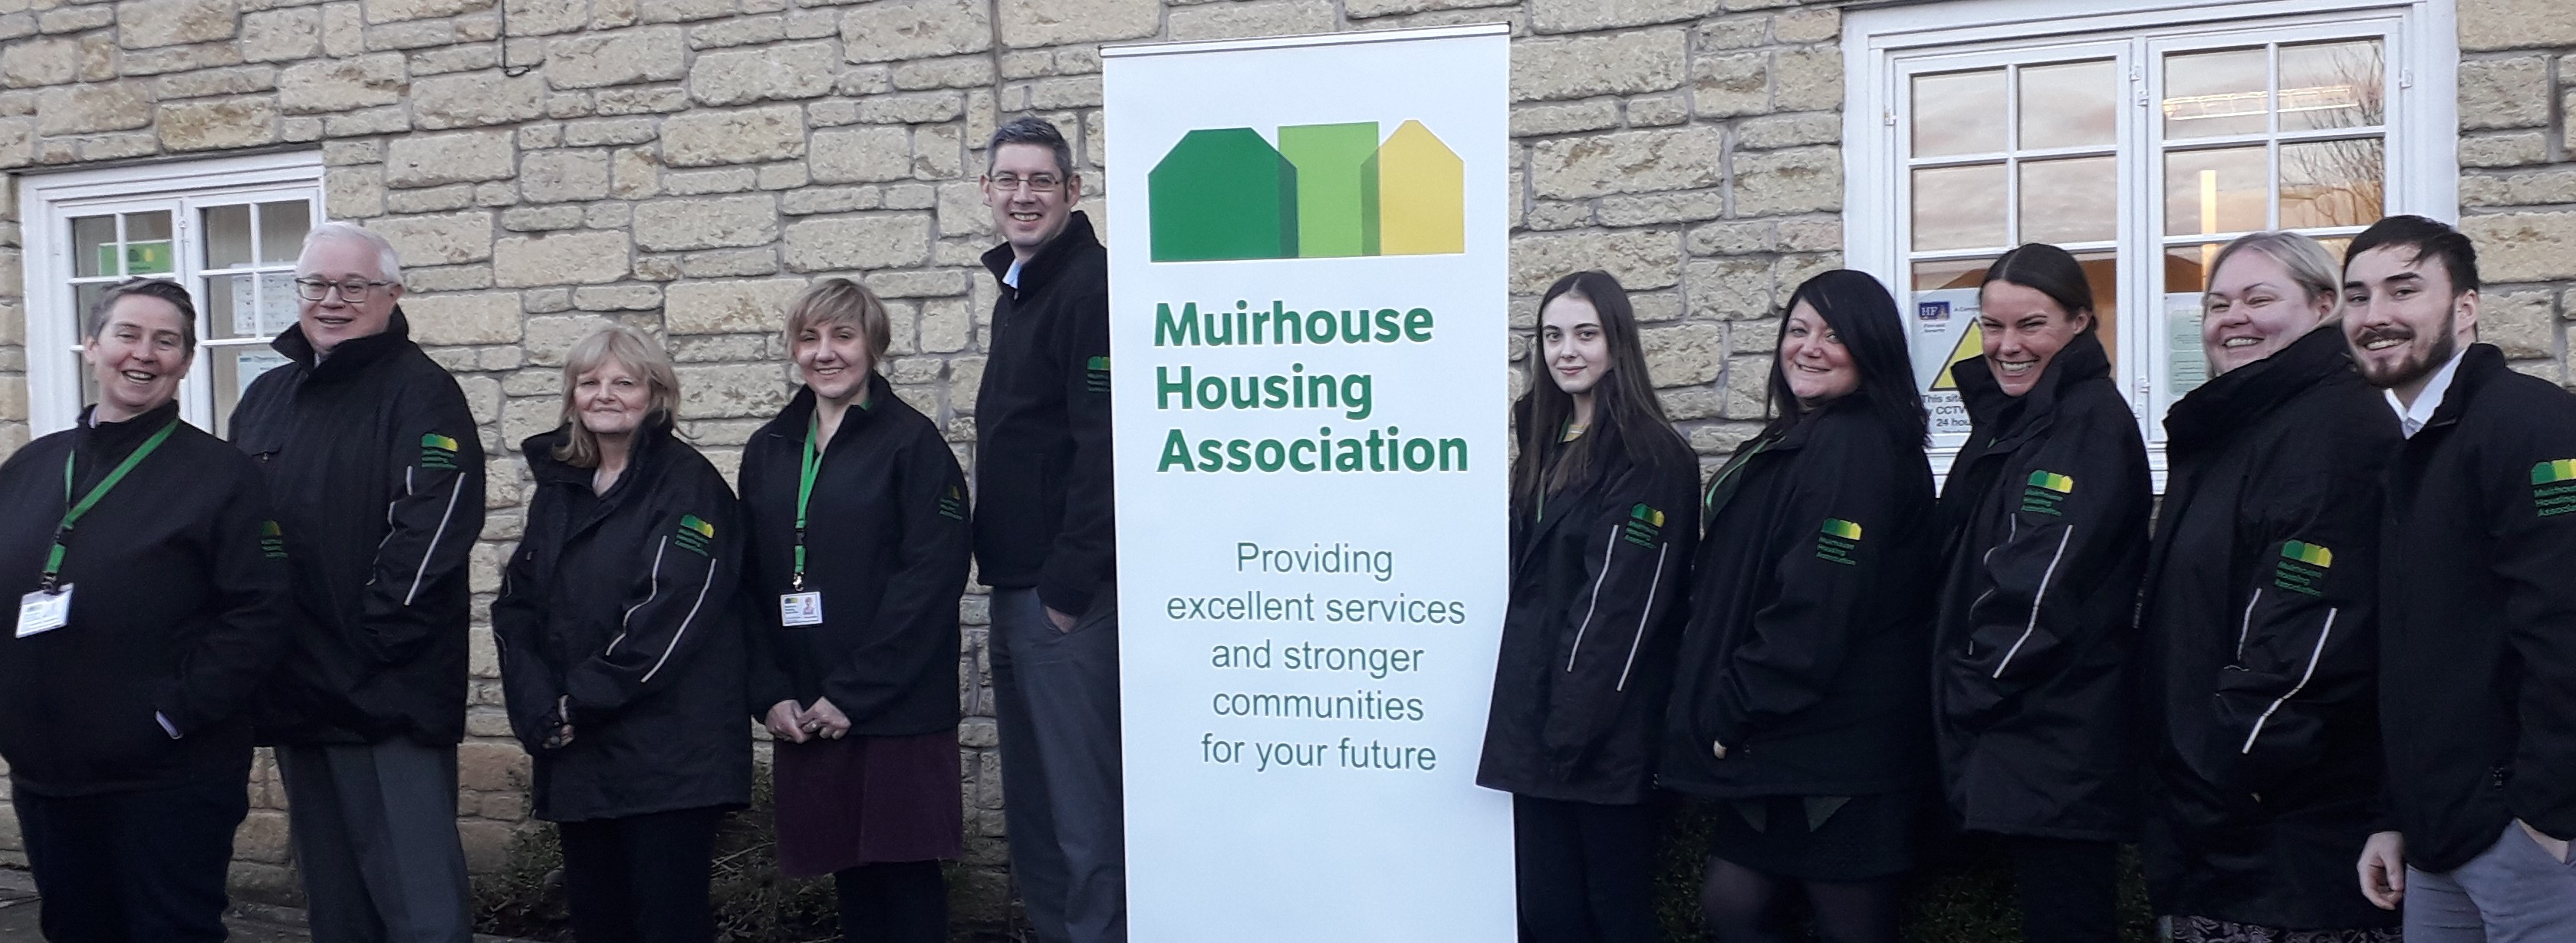 Muirhouse Housing Association launches new website and logo